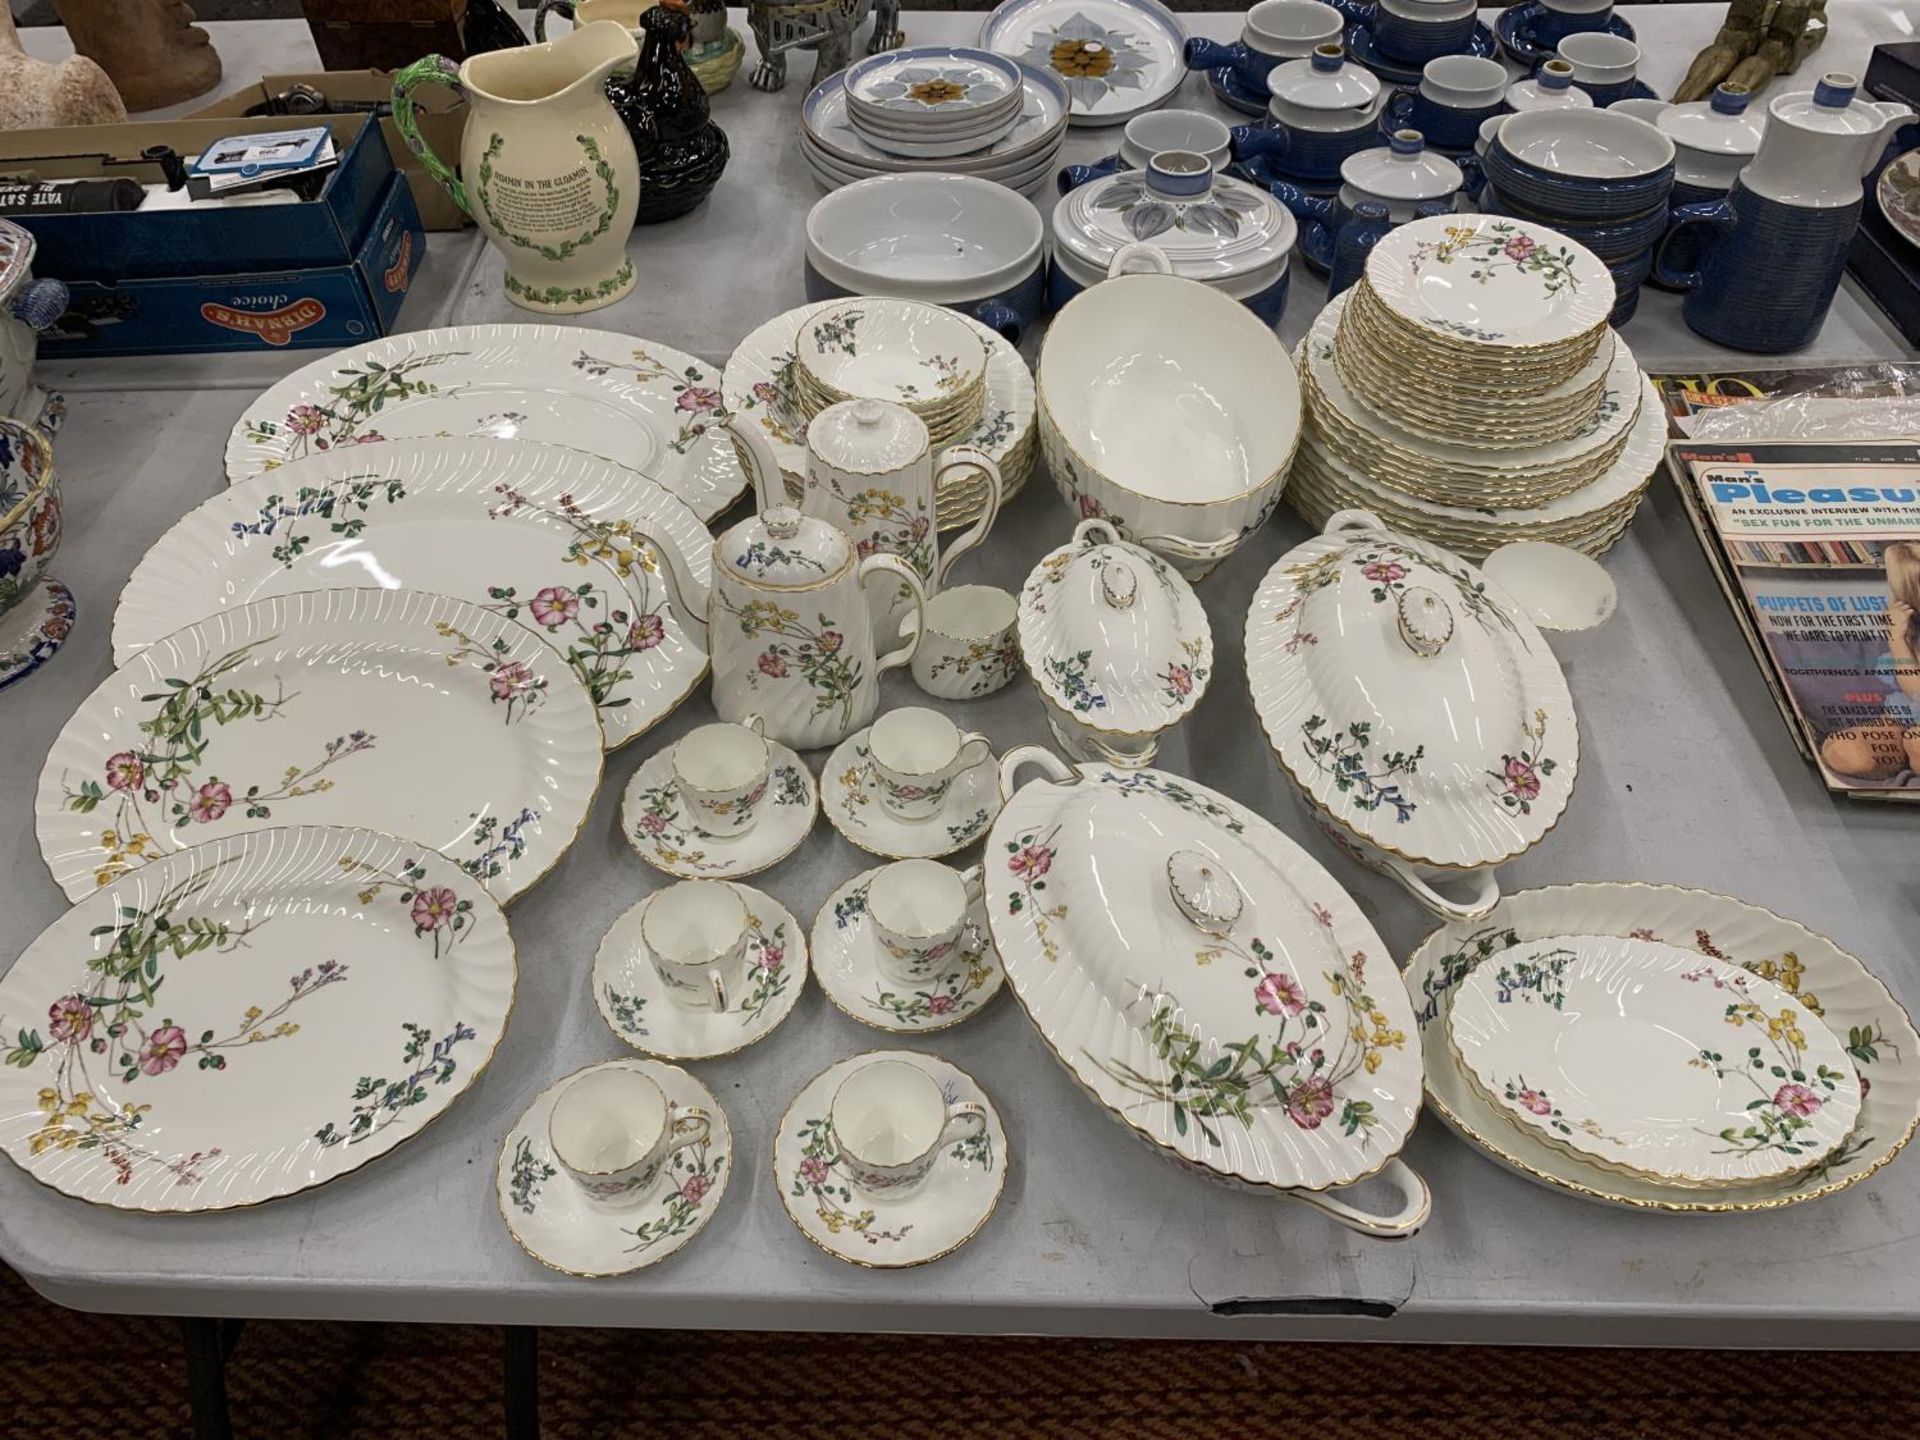 A MINTON 'DAINTY SPRAYS' DINNER SERVICE TO INCLUDE VARIOUS SIZES OF PLATES, SERVING PLATES, BOWLS,